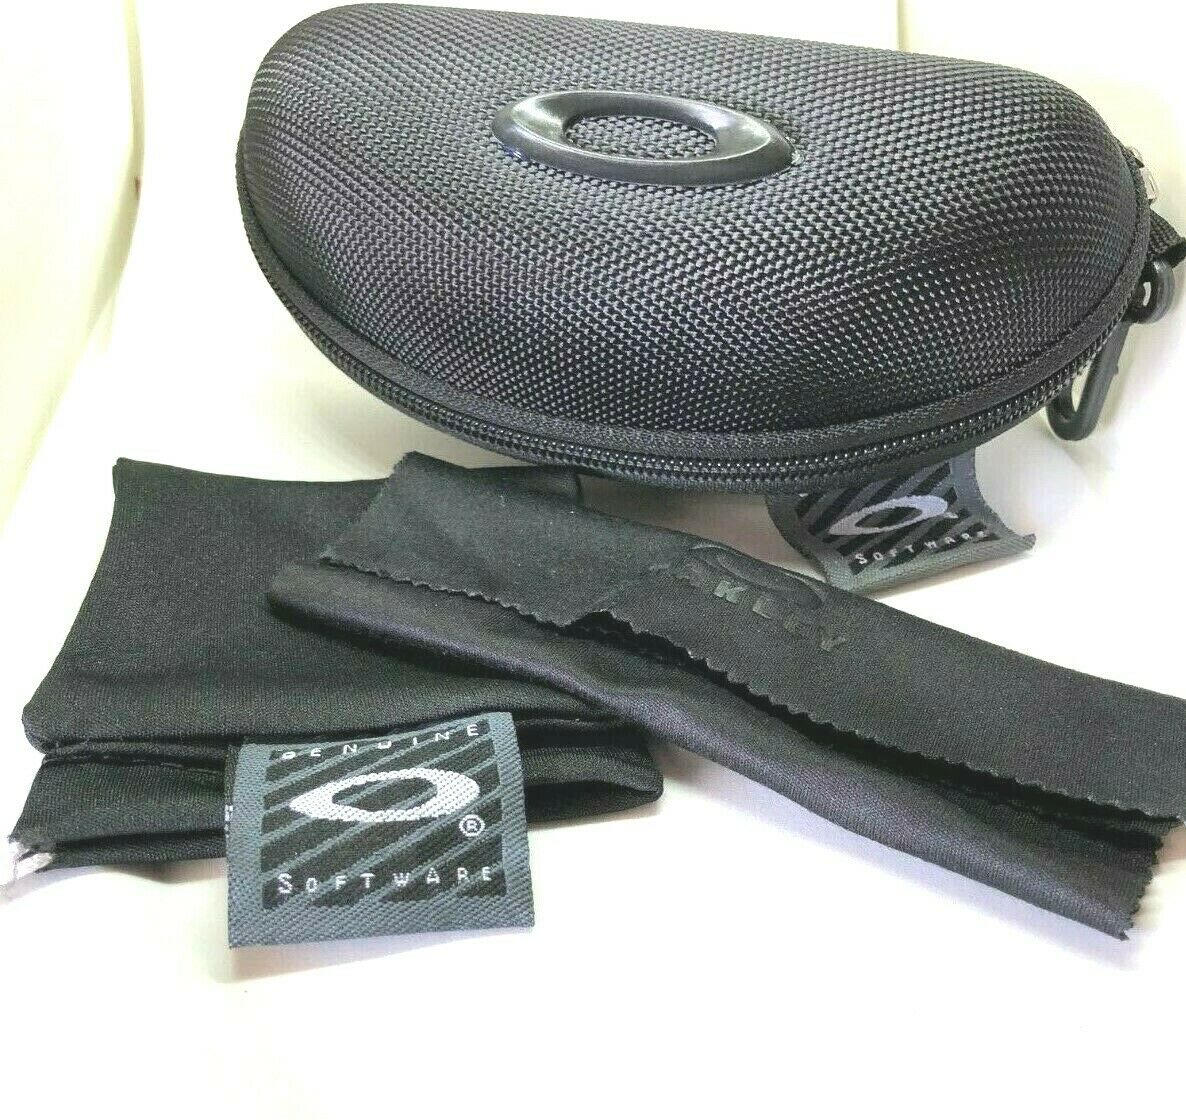 New Oakley Black Sunglasses Case W/ Cleaning Cloth, Dust Bag